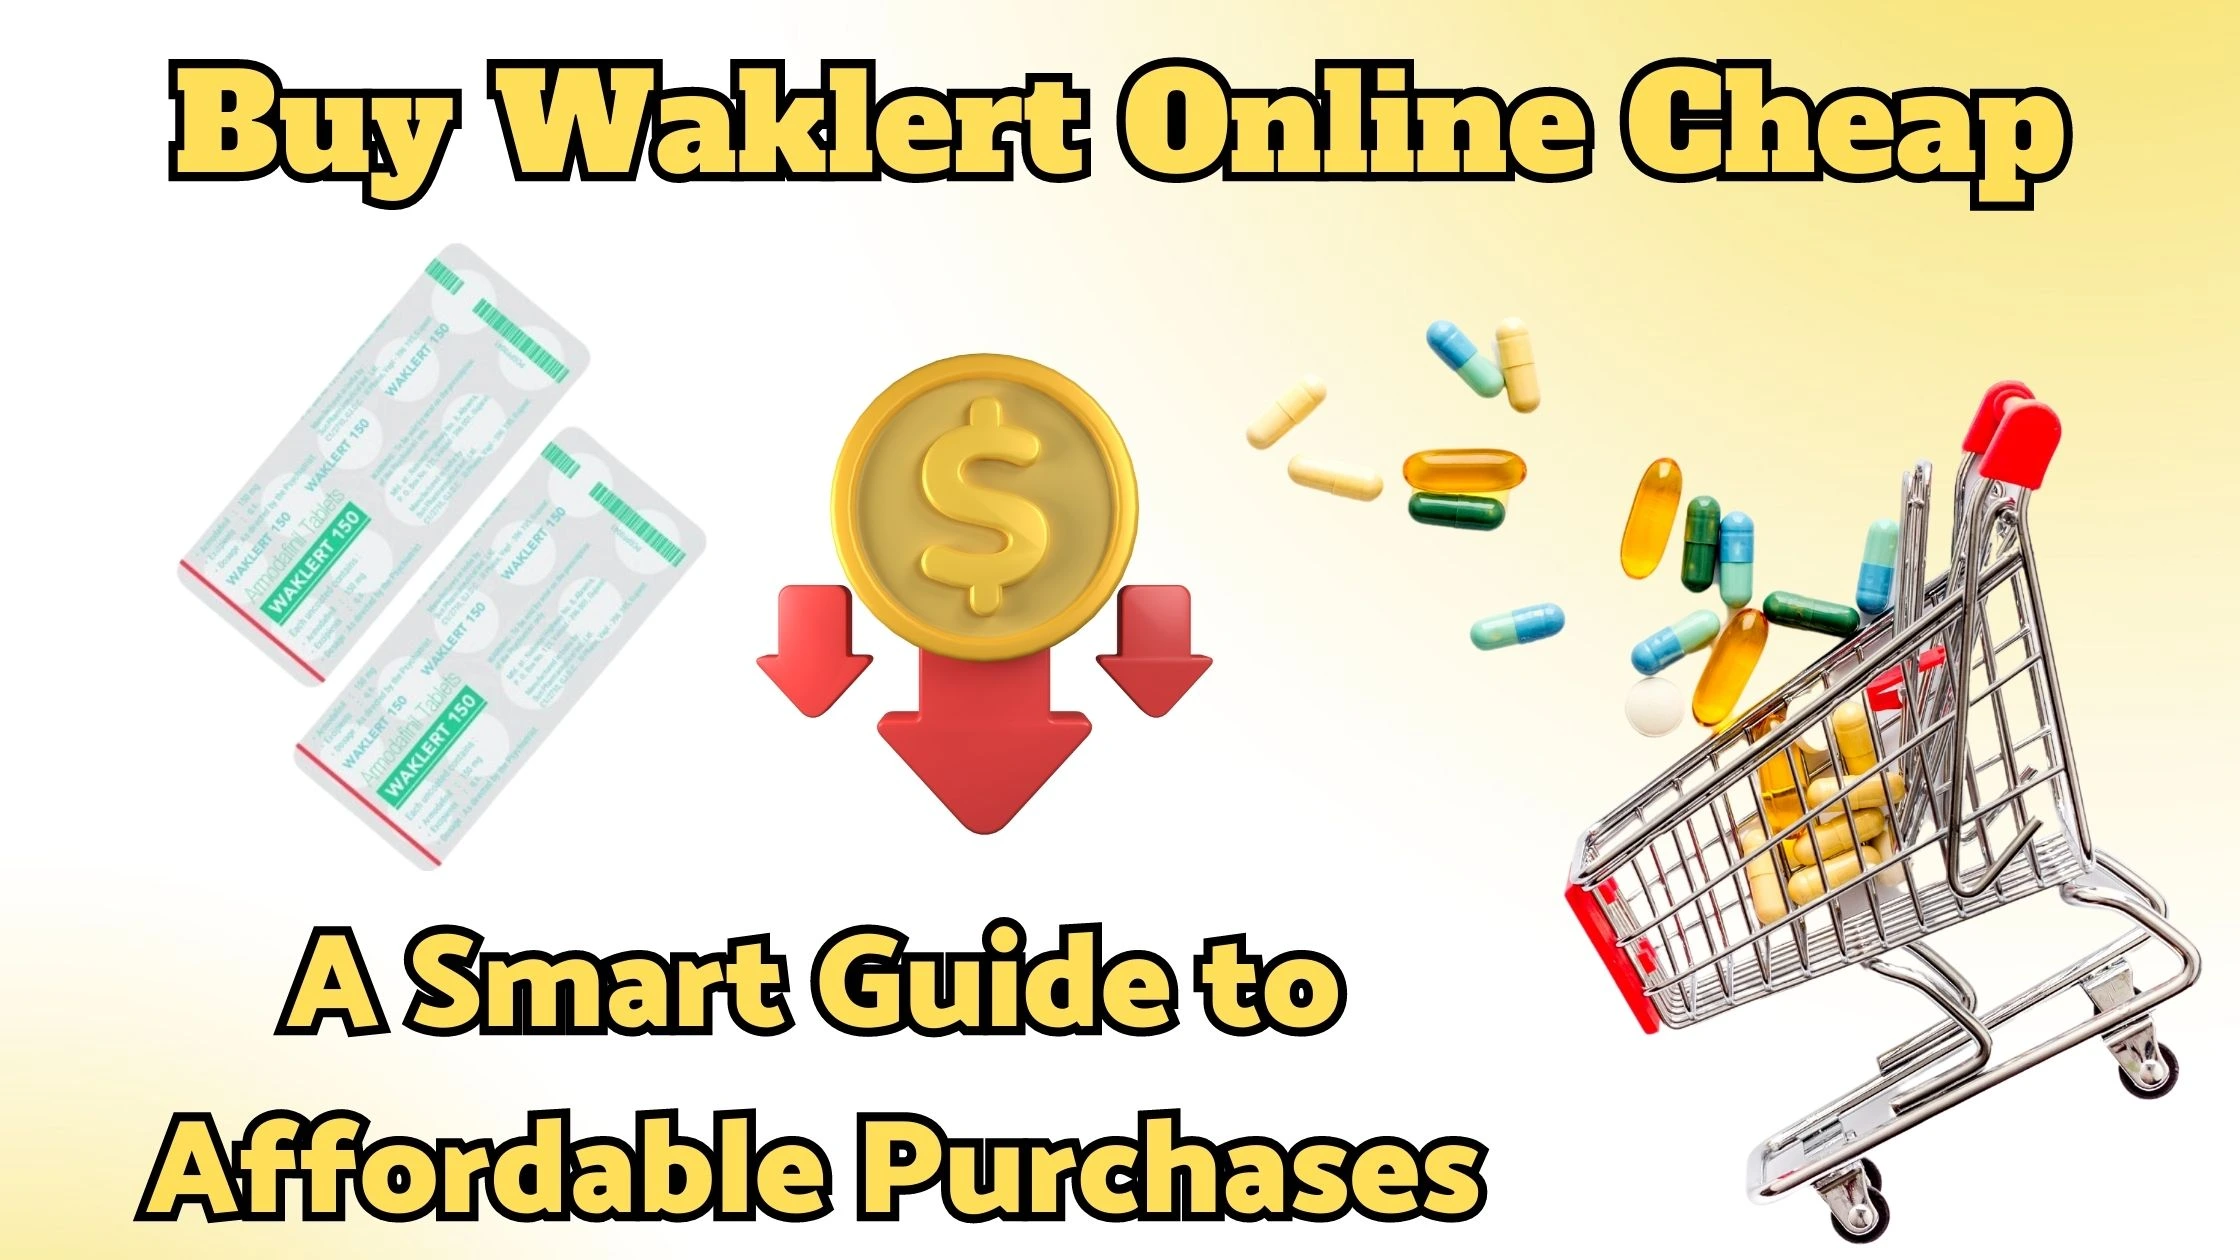 Buy Waklert Online Cheap: A Smart Guide to Affordable Purchases